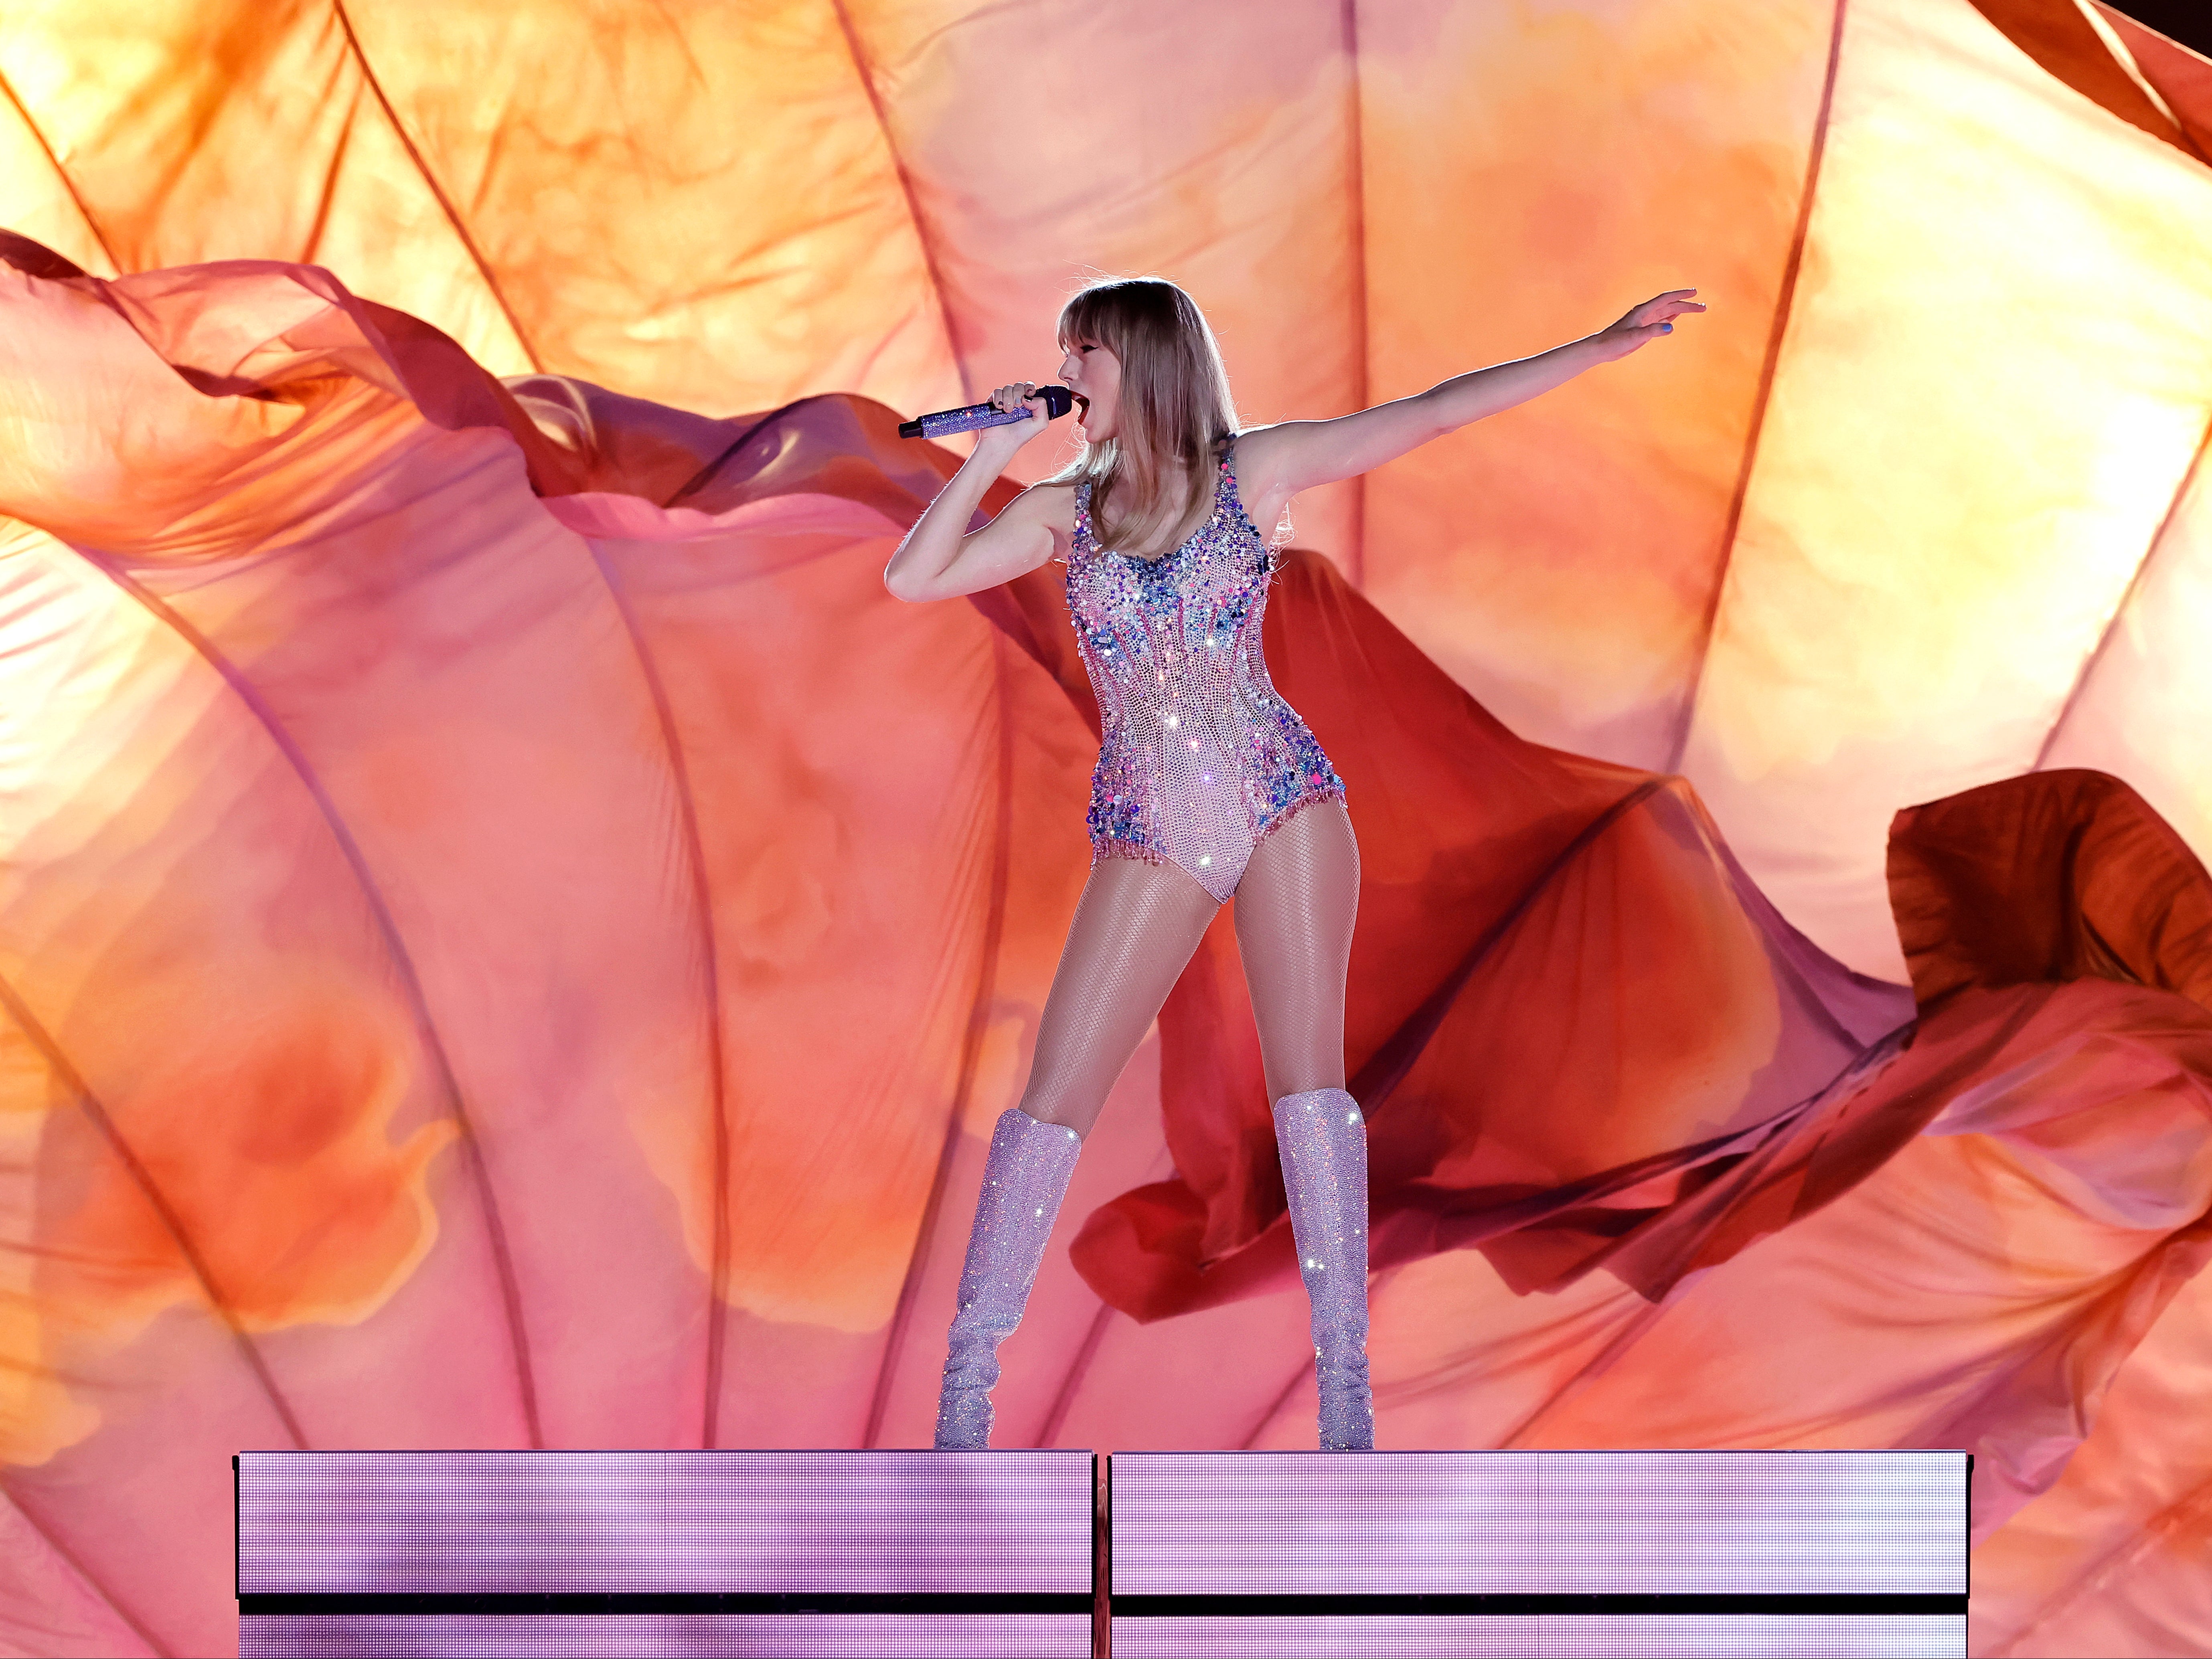 Swift performs a variety of her greatest hits on the Eras Tour